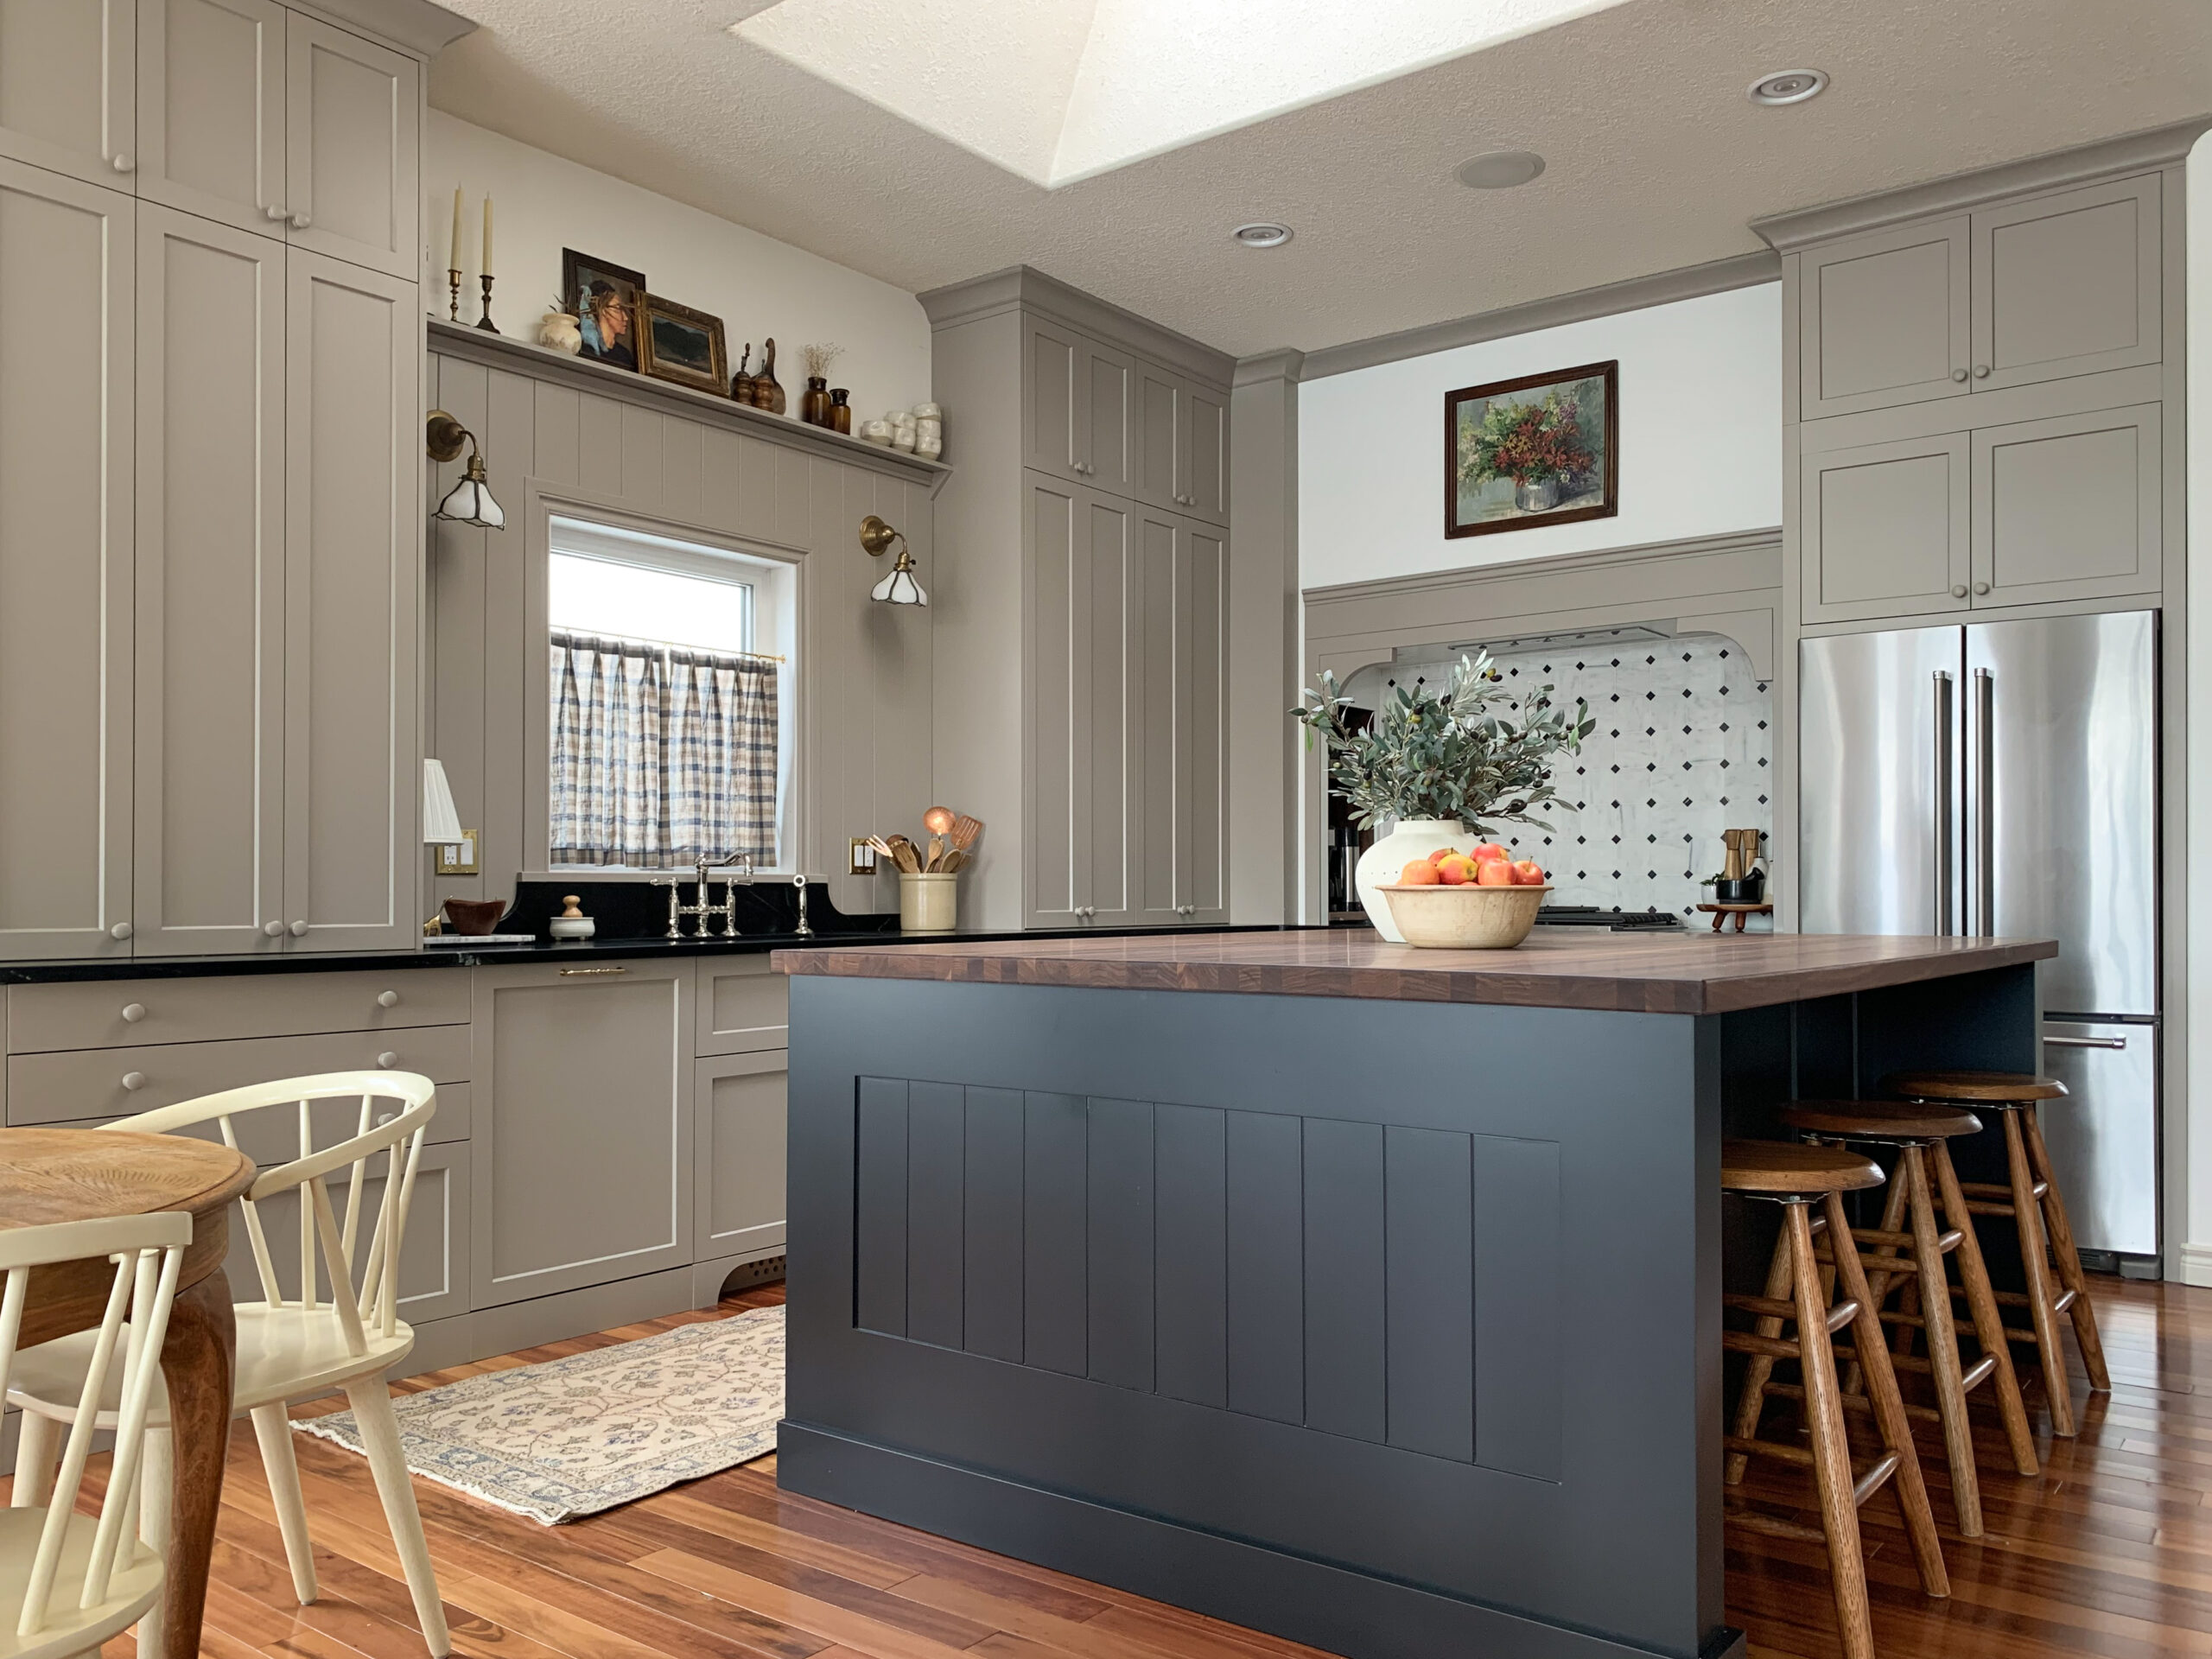 A Guide for Standard Kitchen Cabinet Dimensions